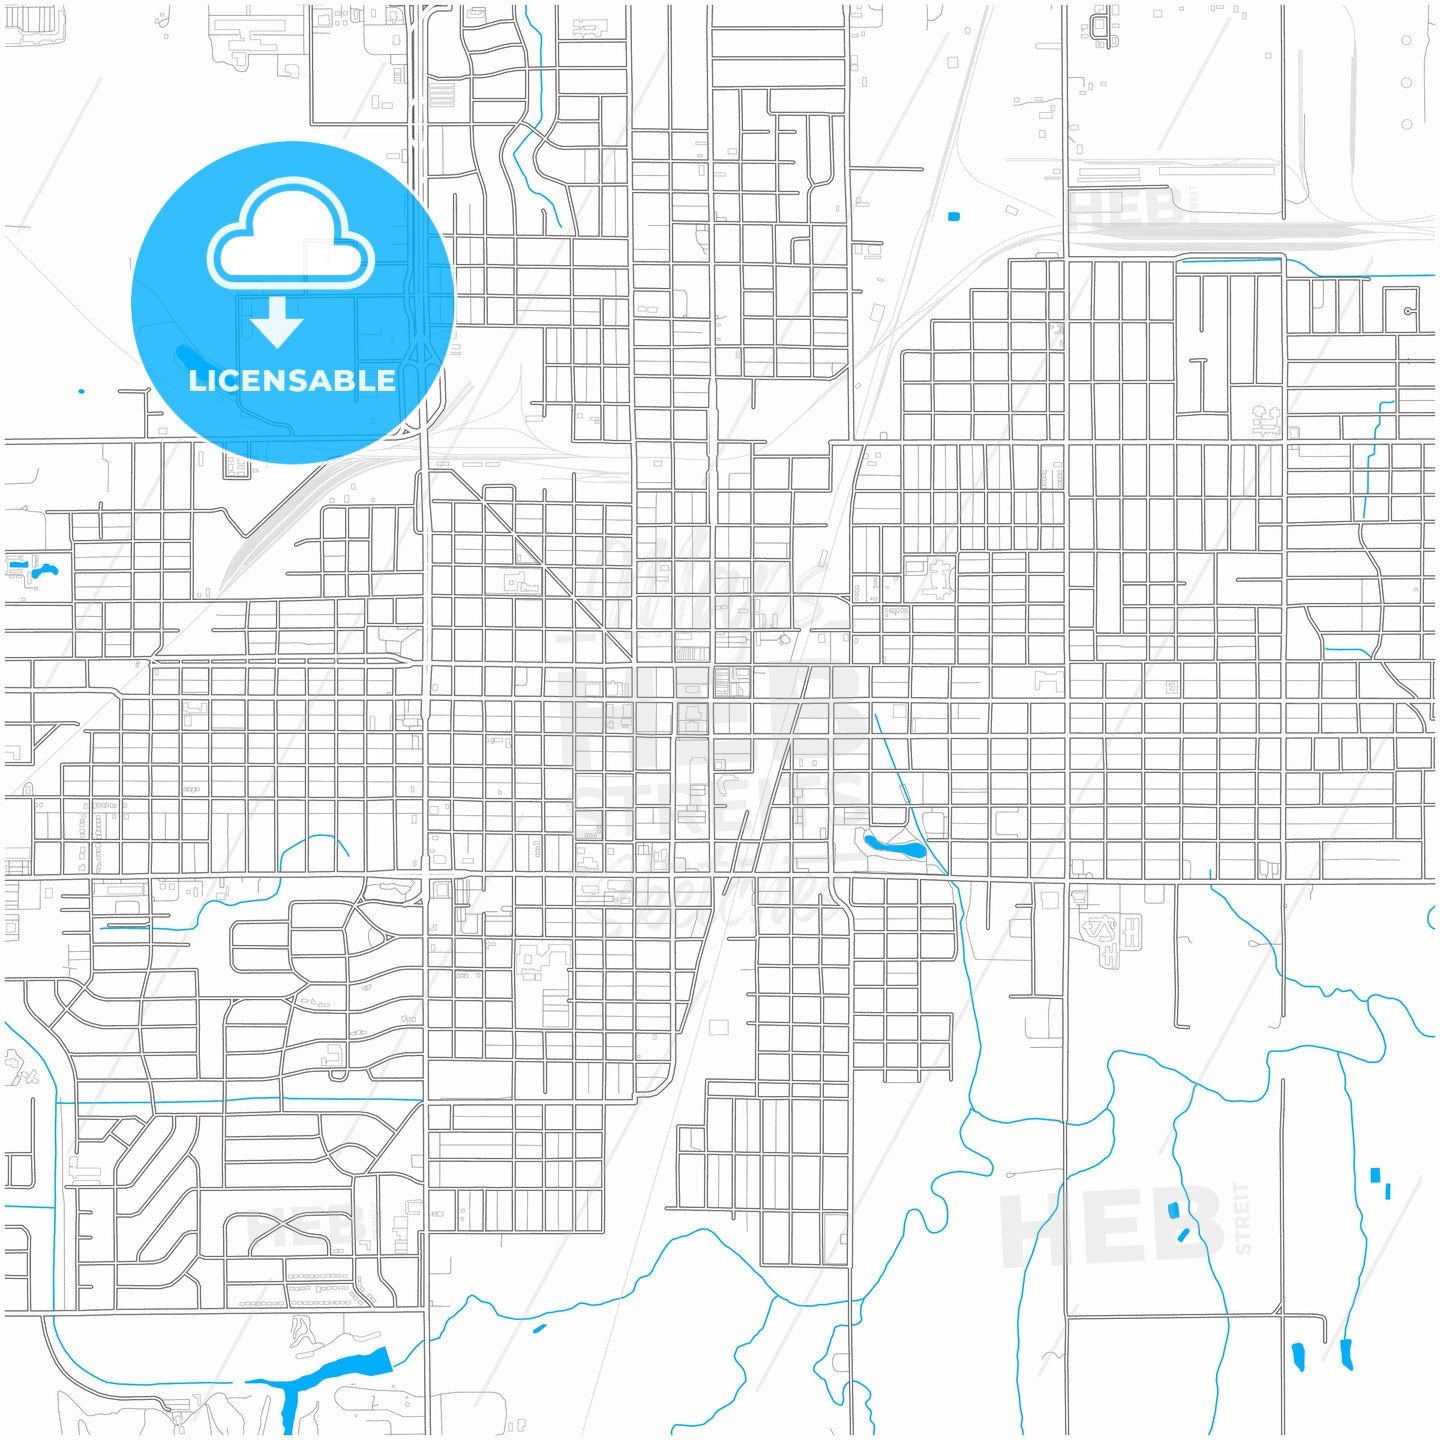 Enid, Oklahoma, United States, city map with high quality roads.